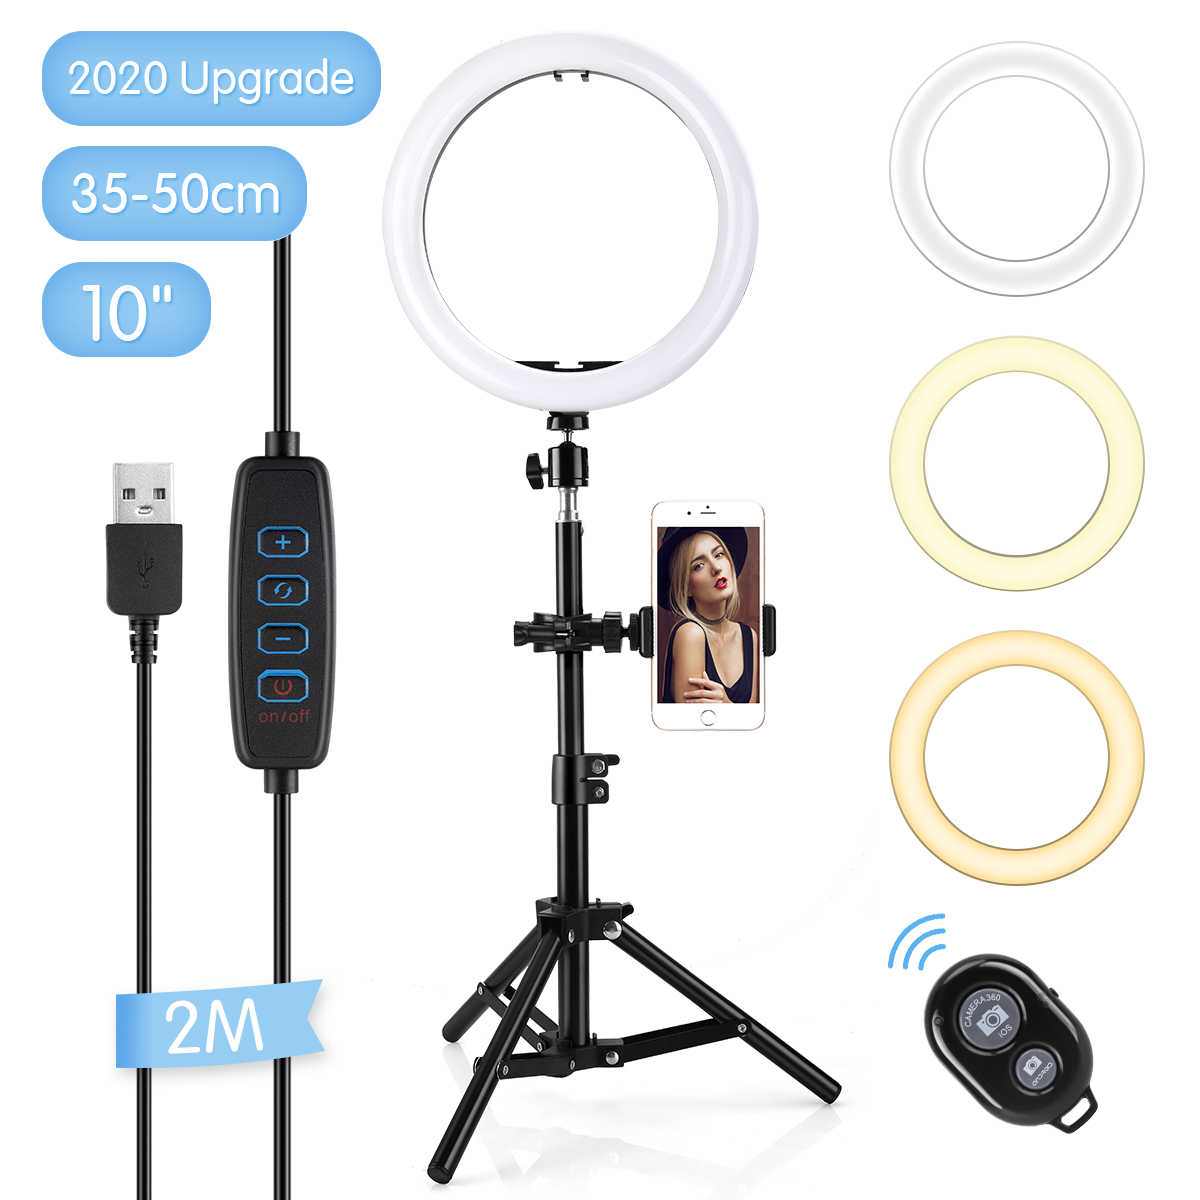 Desktop Selfie Ring Light with Tripod Stand & Remote Light Modes for Video/Live Stream/Makeup/Photography for iPhone Android 